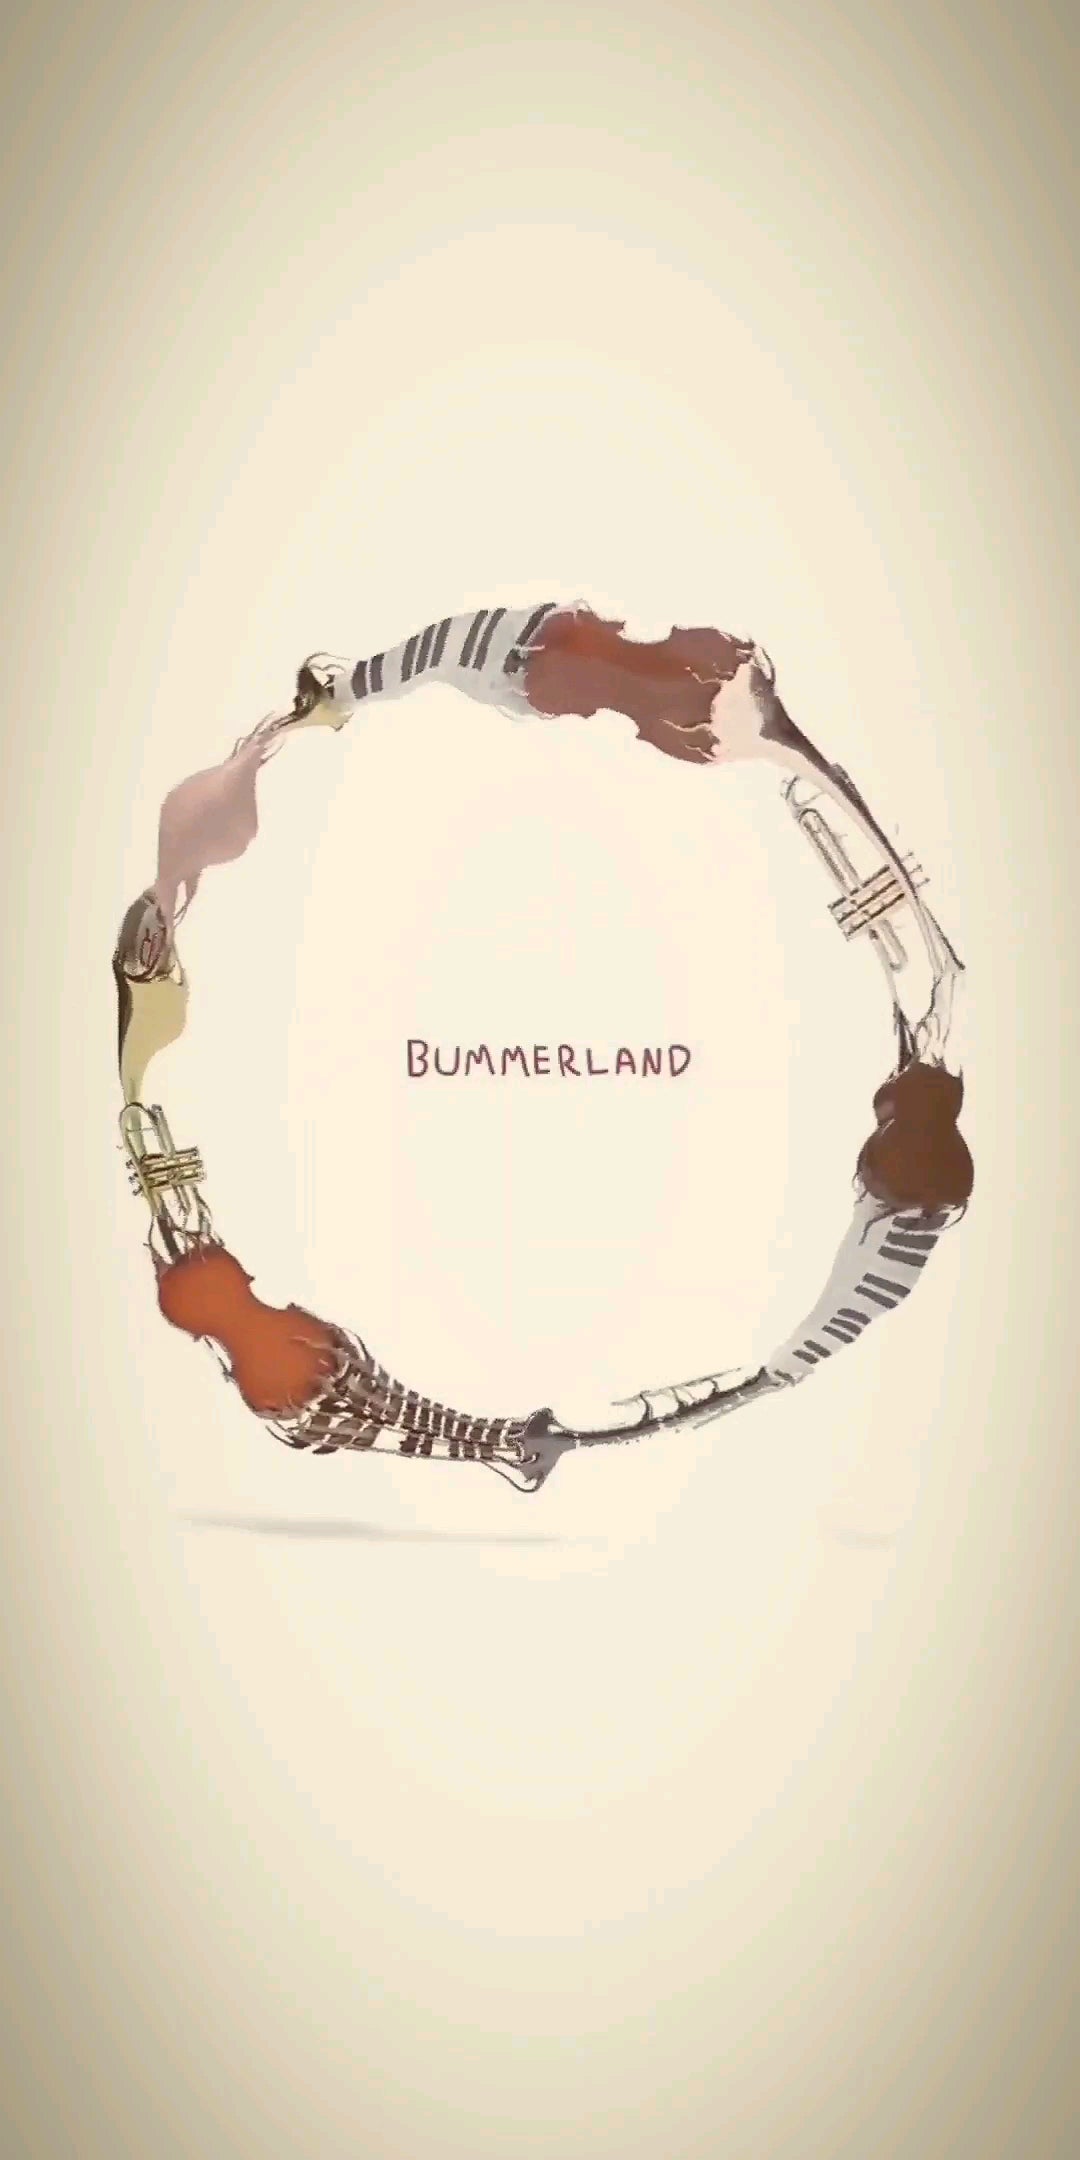 I made a Bummerland live wallpaper for phone.: AJR